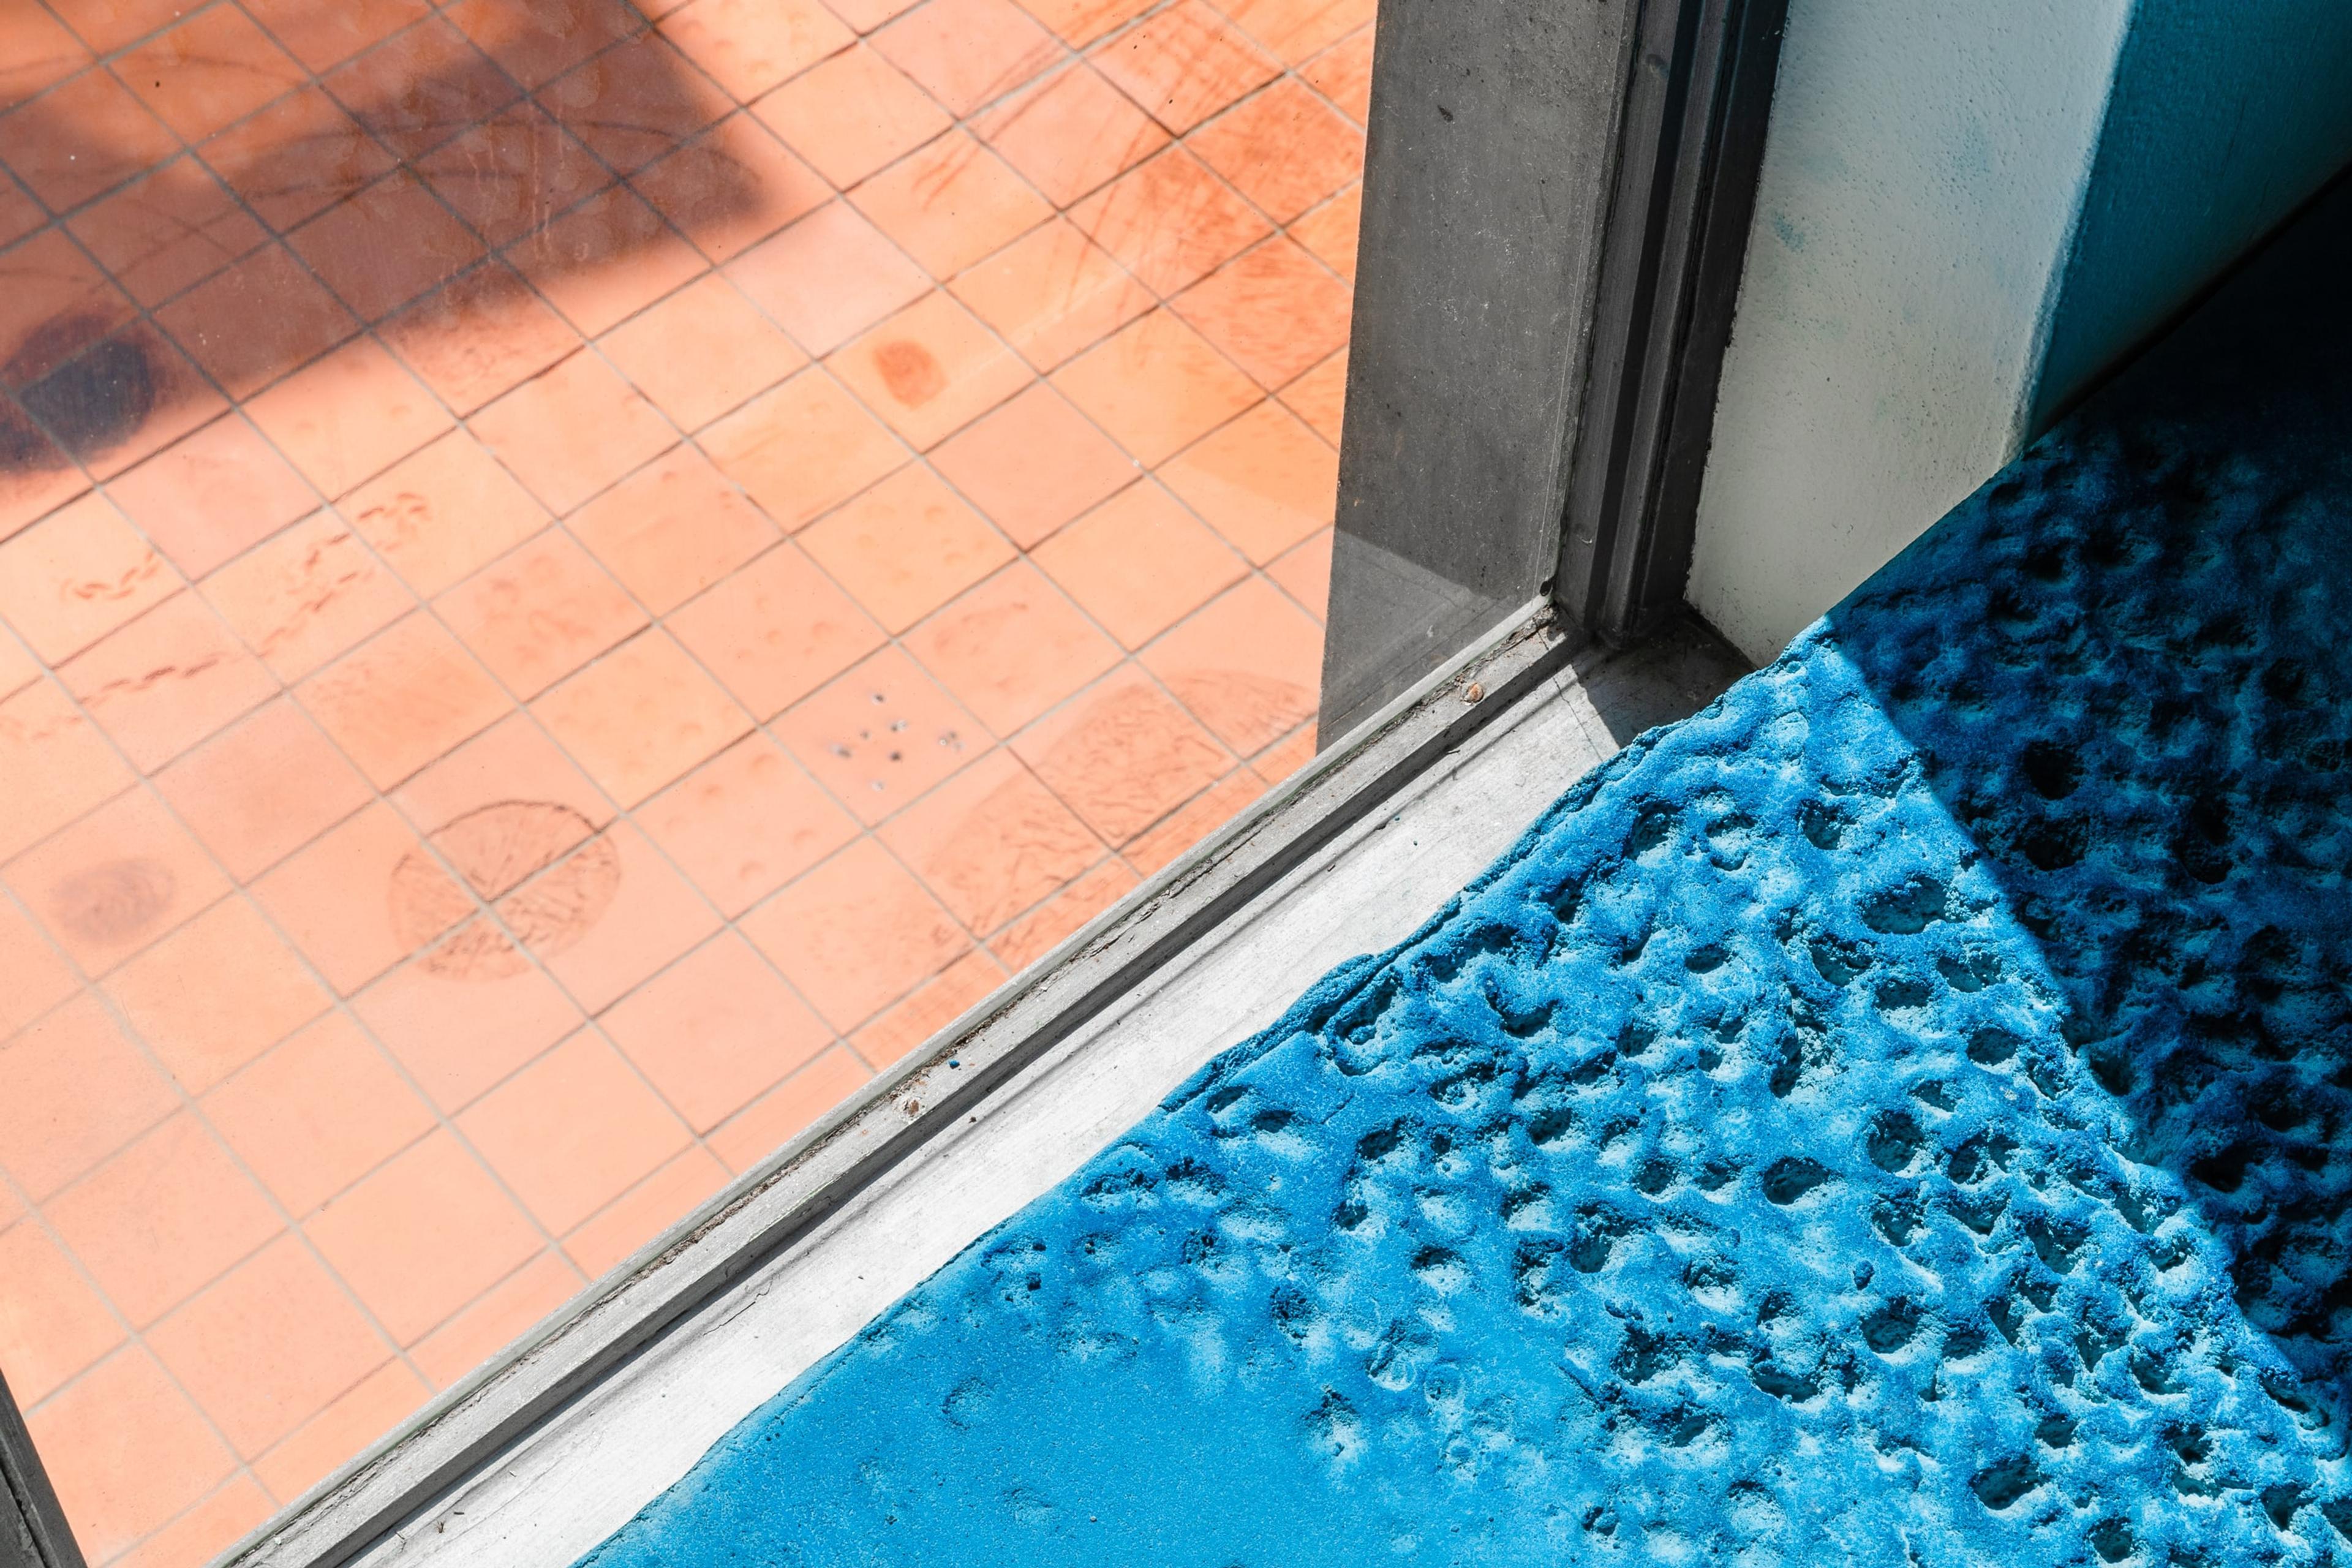 A view of the textured blue ground inside the gallery, and outside the window is textured terracotta tiles